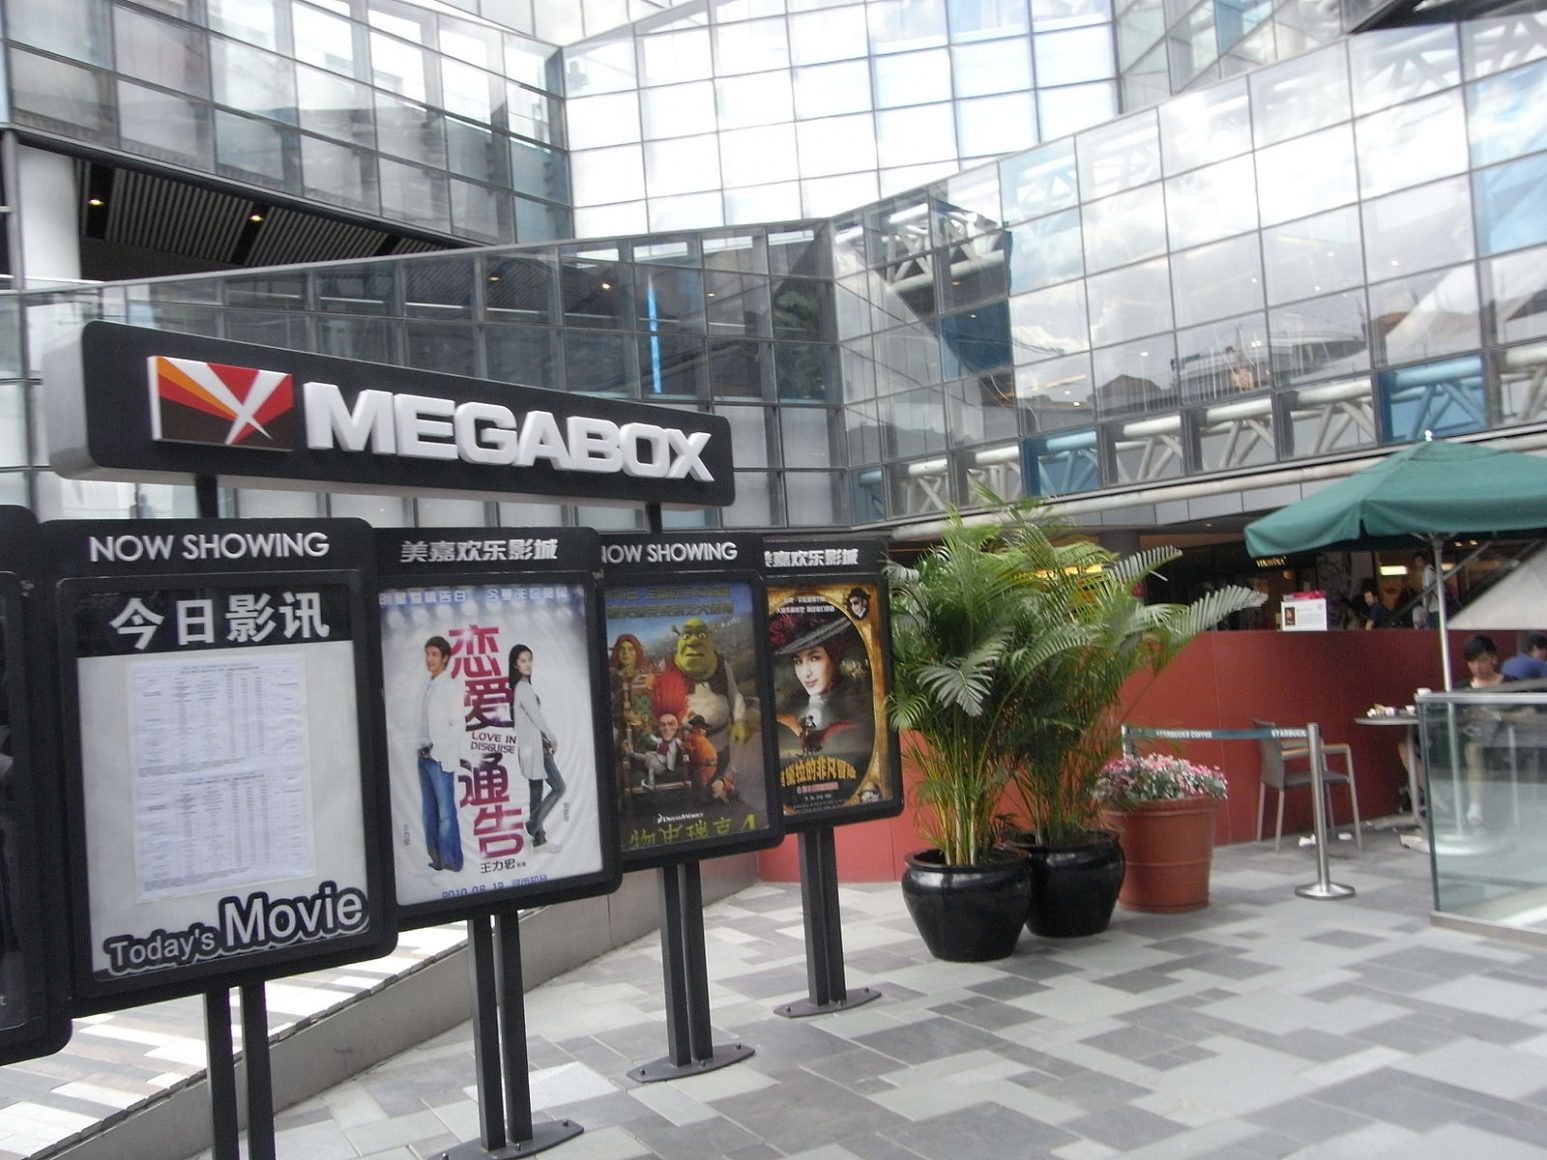 Movie posters at the entrance of a Megabox theater in Beijing